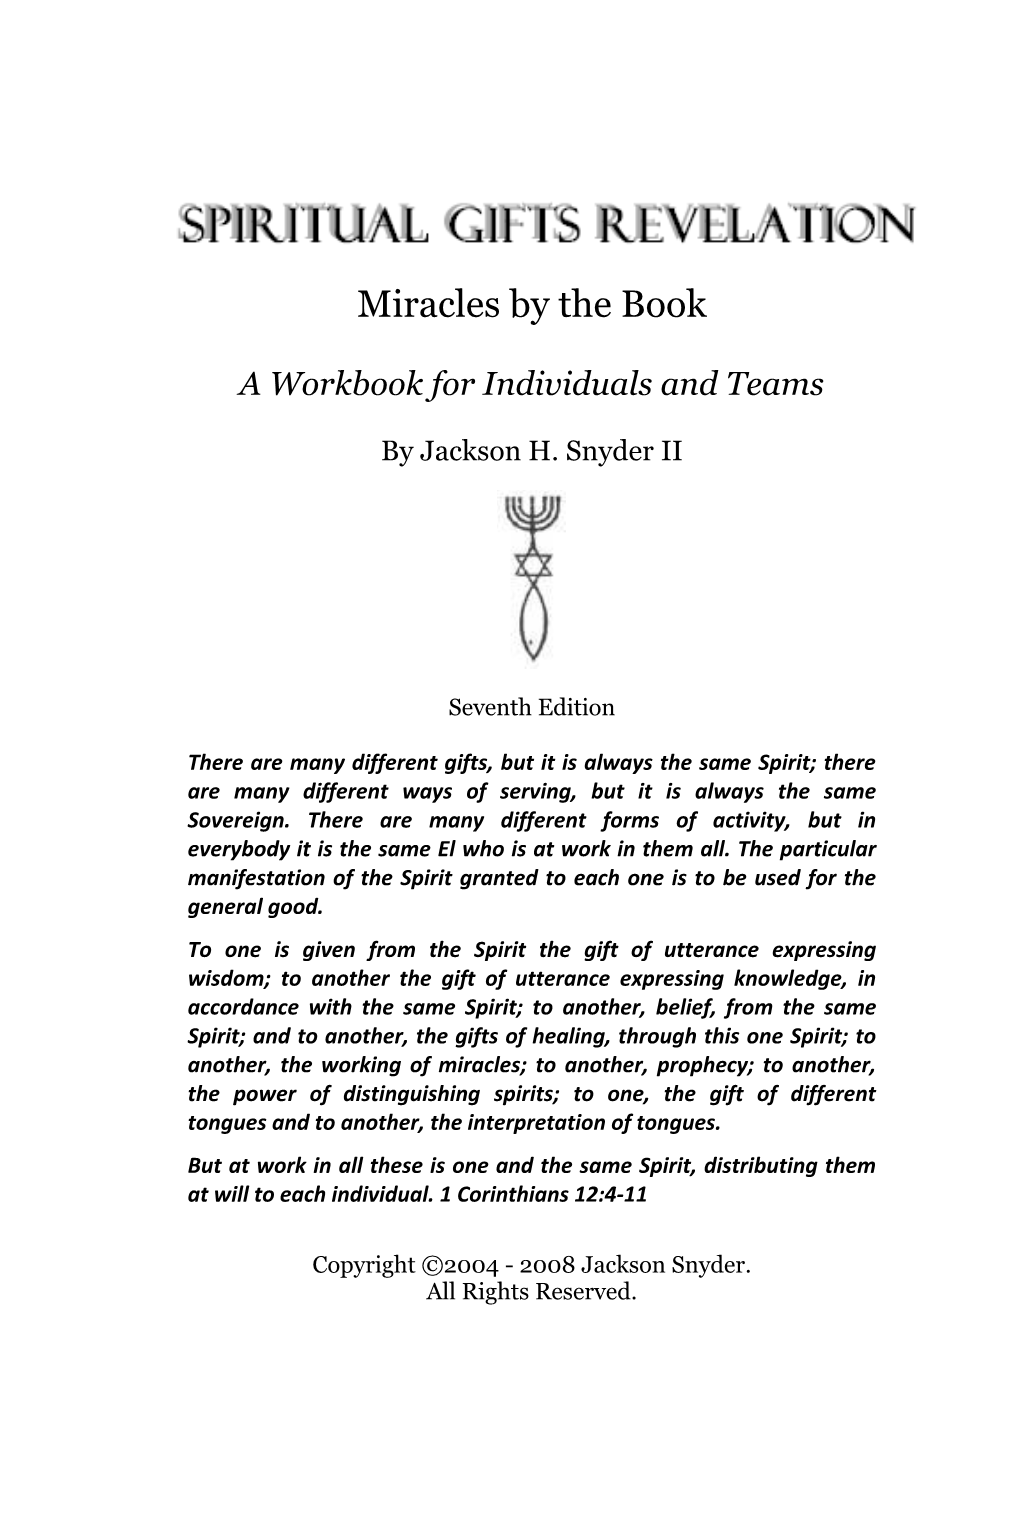 Miracles by the Book